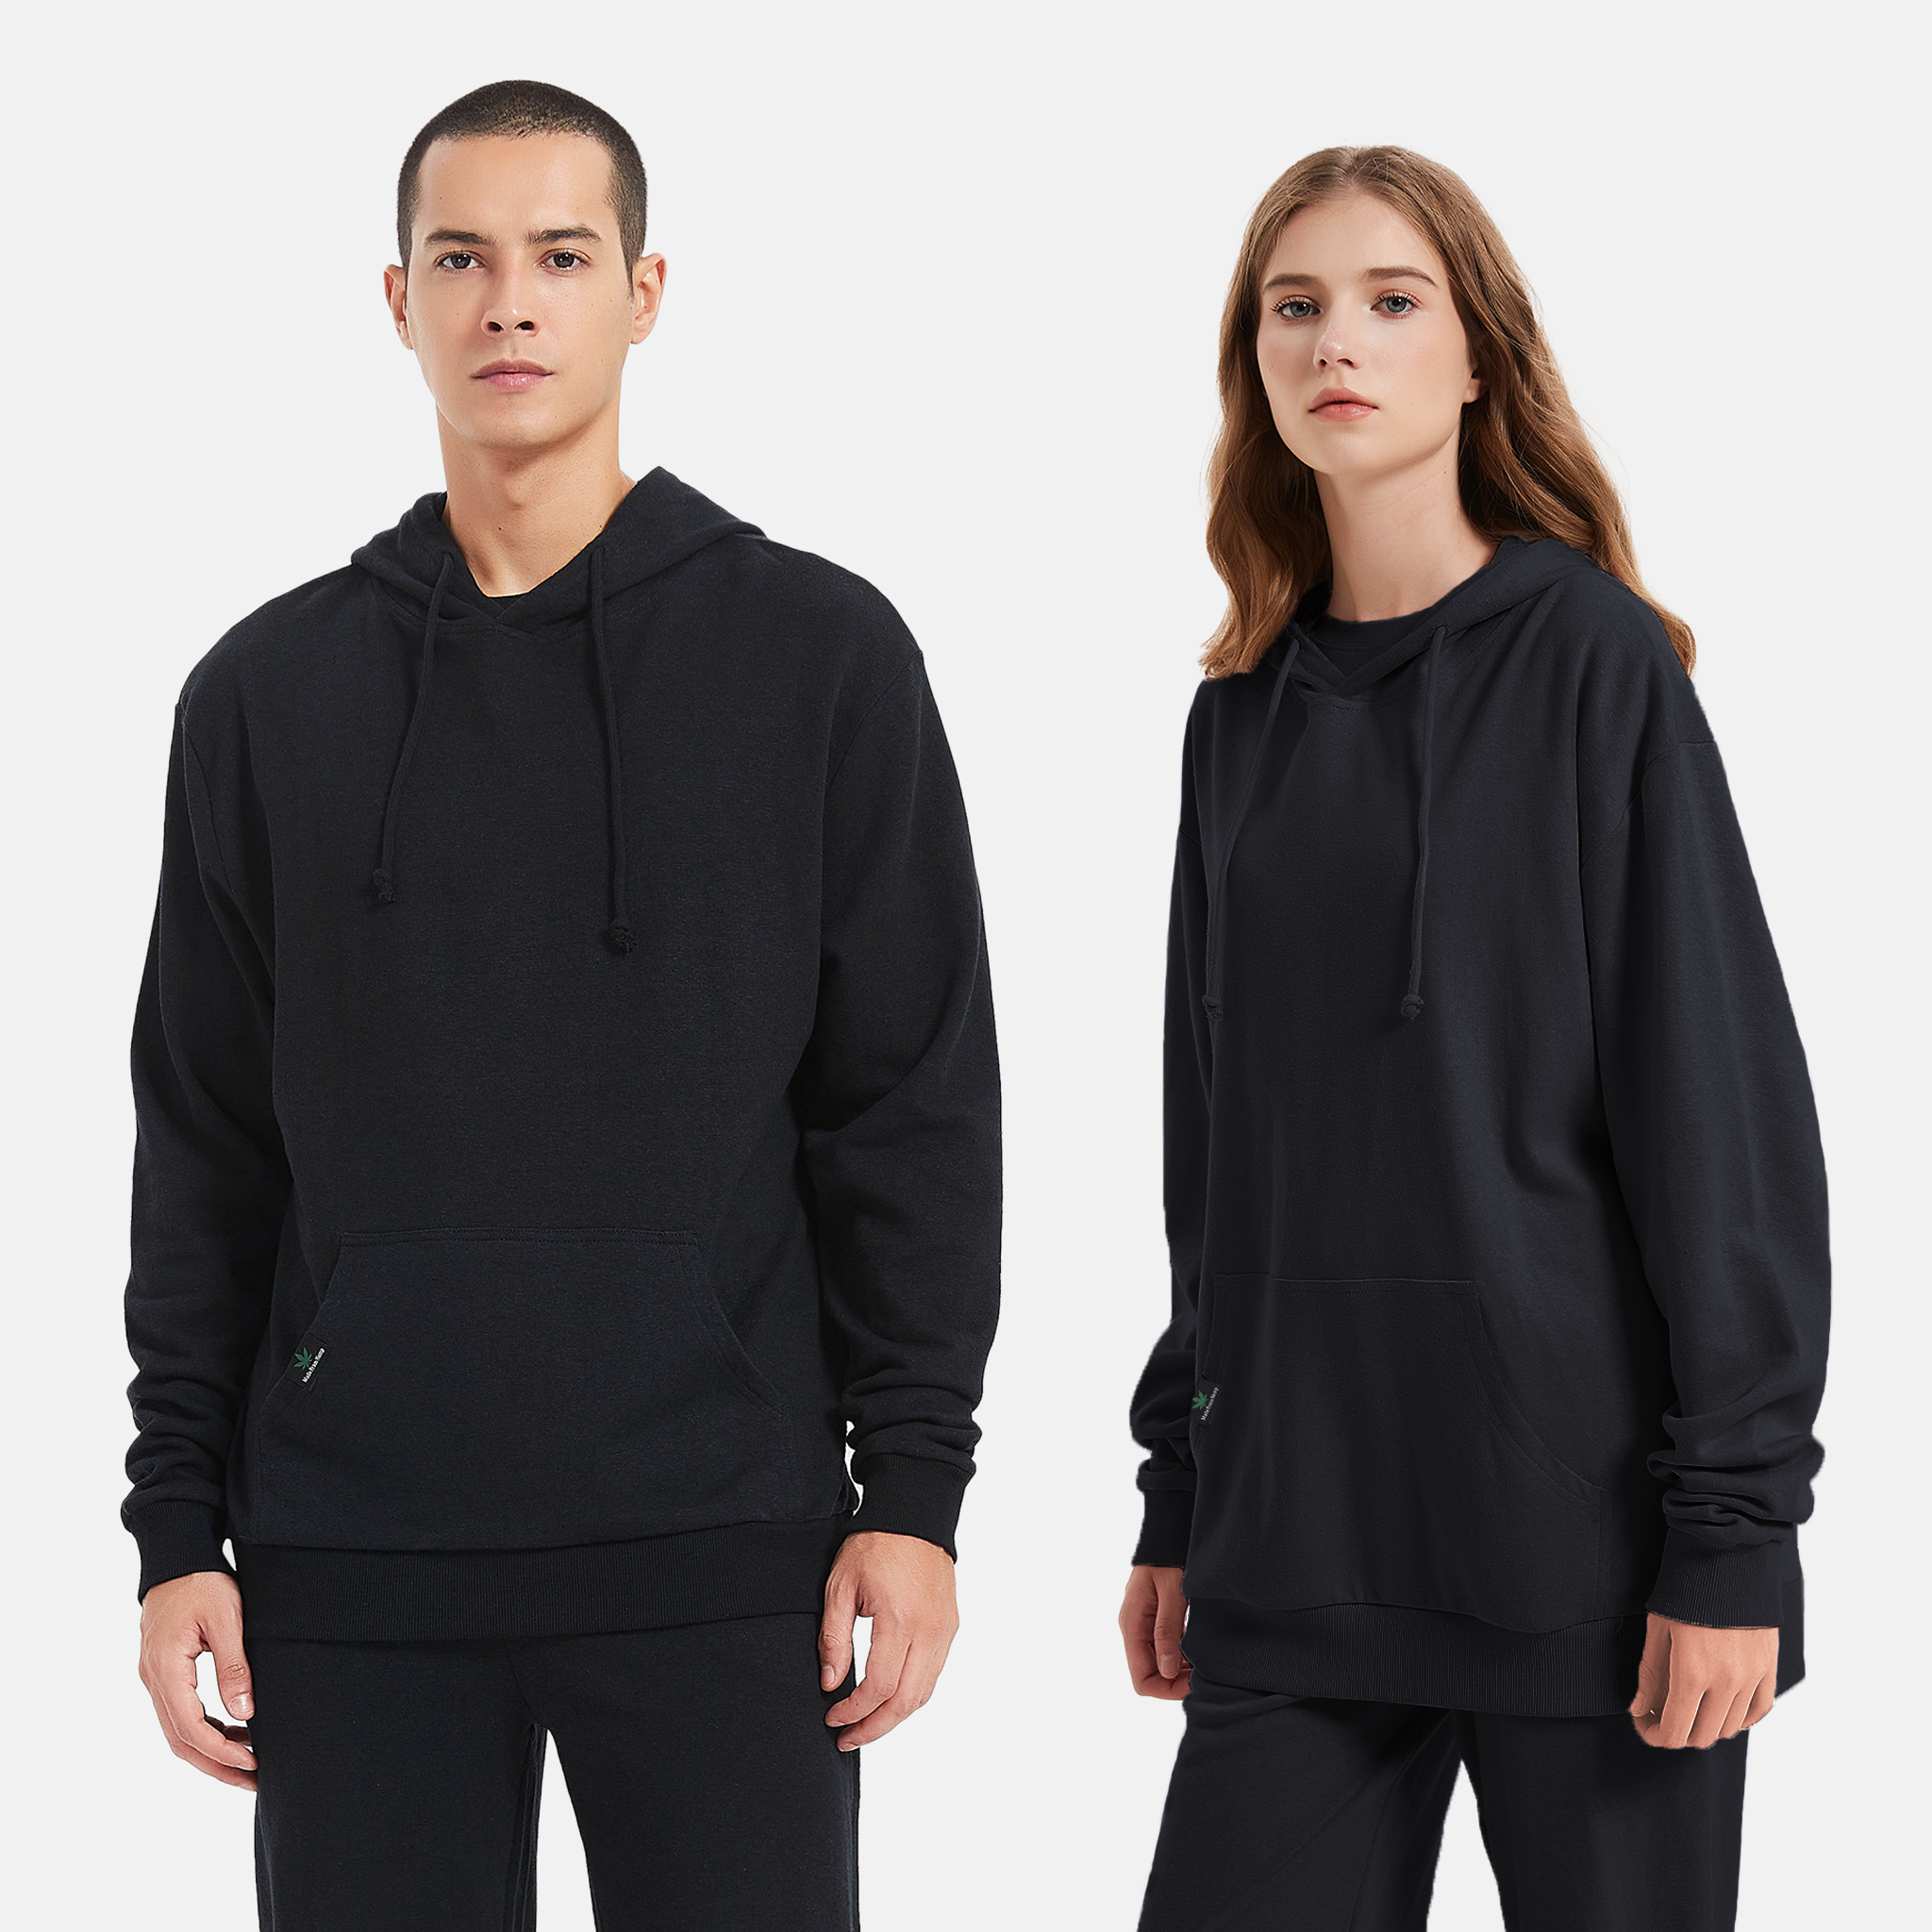 Black sustainable hoodie, Eco-friendly fashion for conscious consumers. Mens and Womens